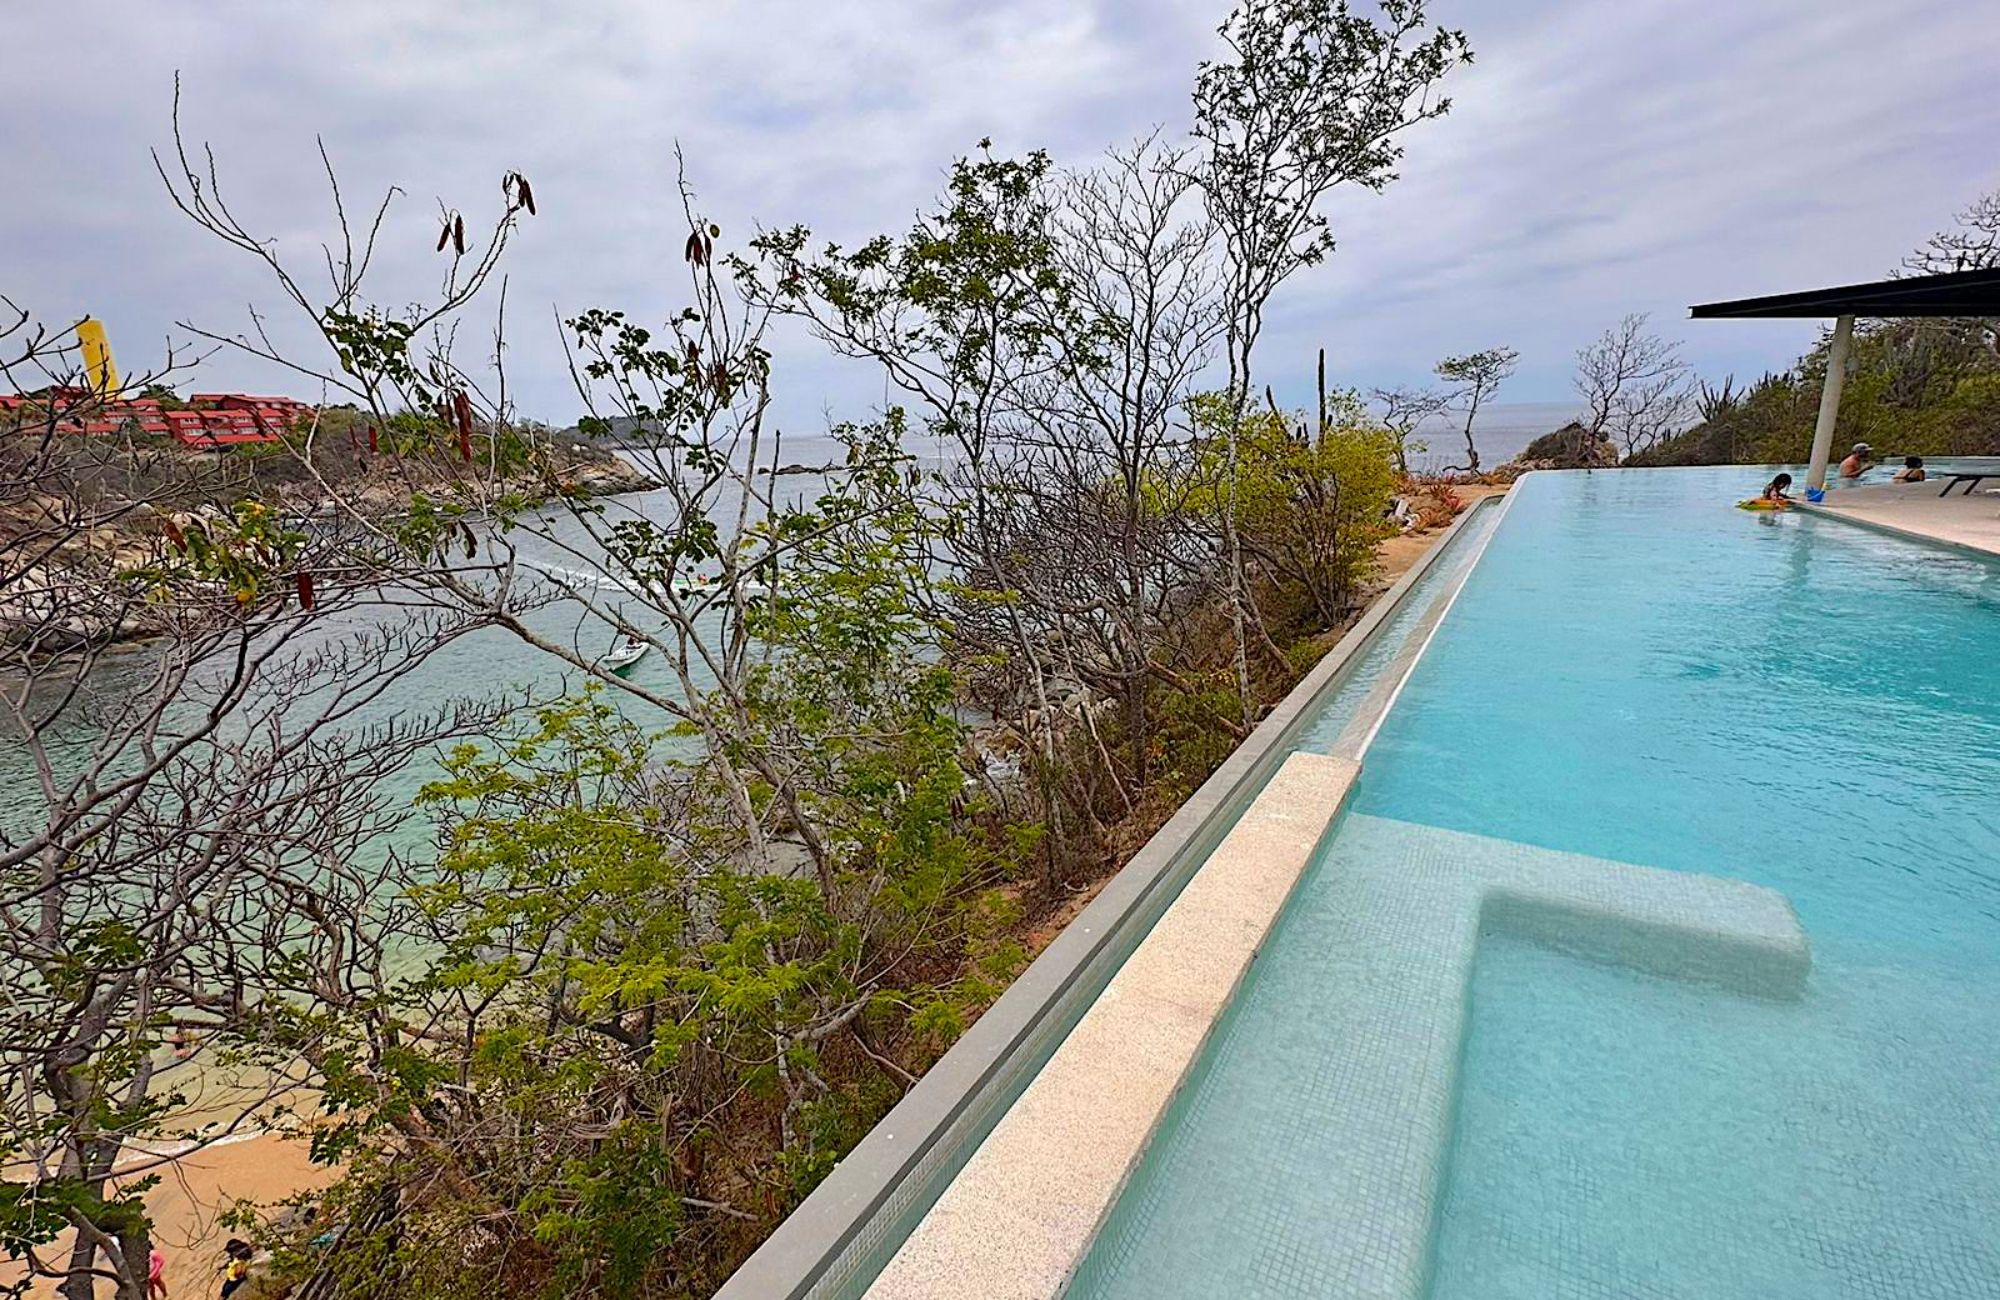 Apartment, mountain view, private pool, garden, for sale in Huatulco.